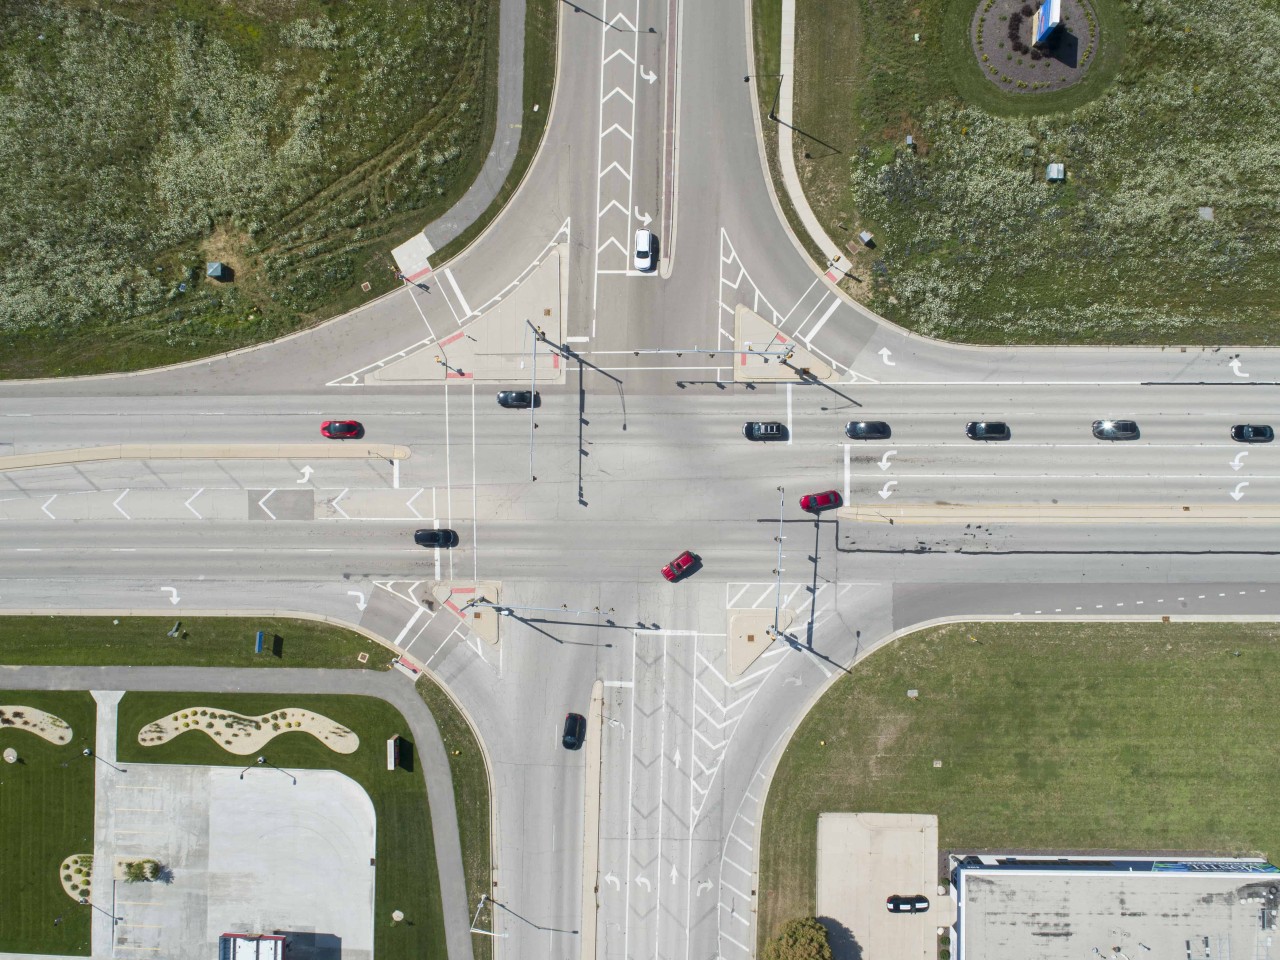 A crossroad intersection with cars